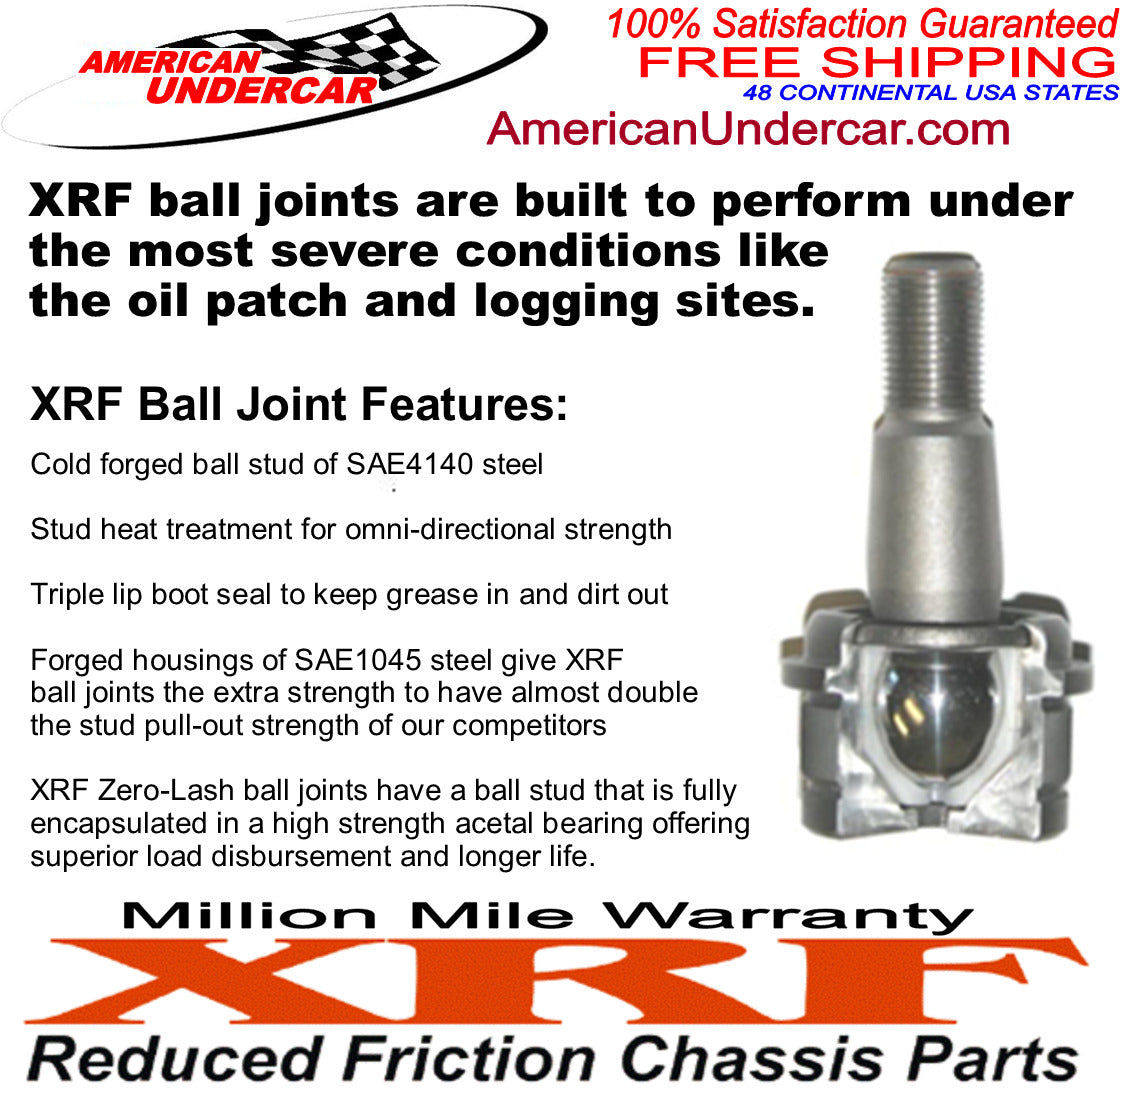 XRF Ford F550 Super Duty Ball Joint Steering and Suspension Kit 2005 - 2010 4x4